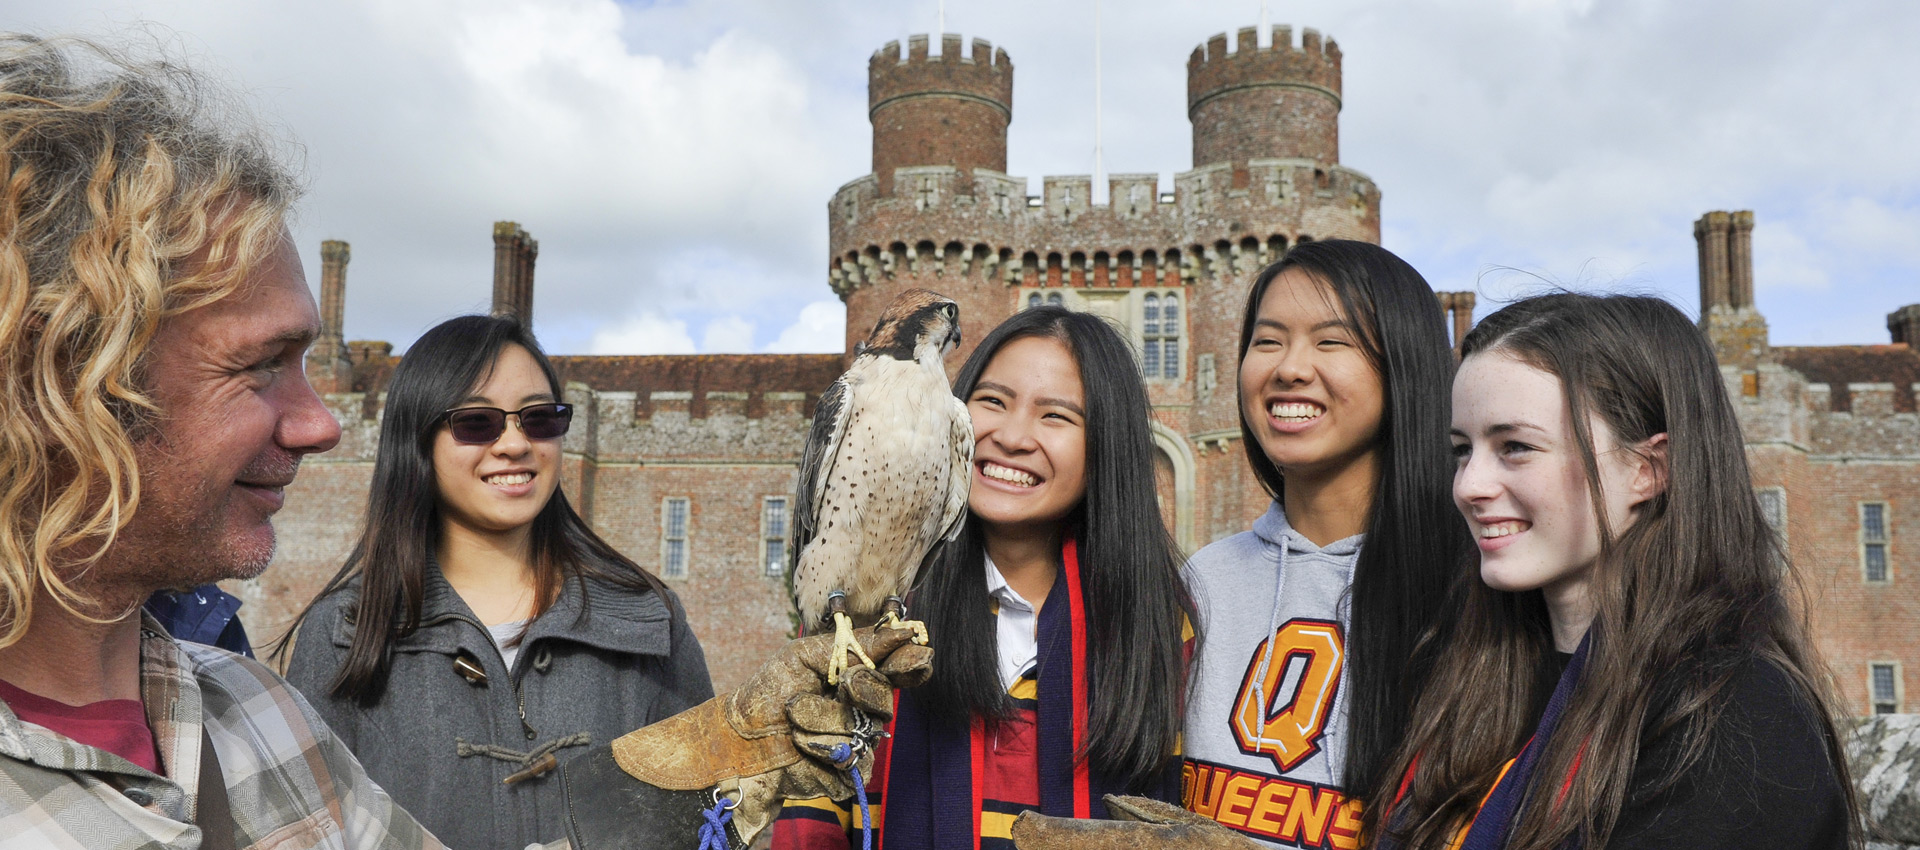 Students holding a bird of prey